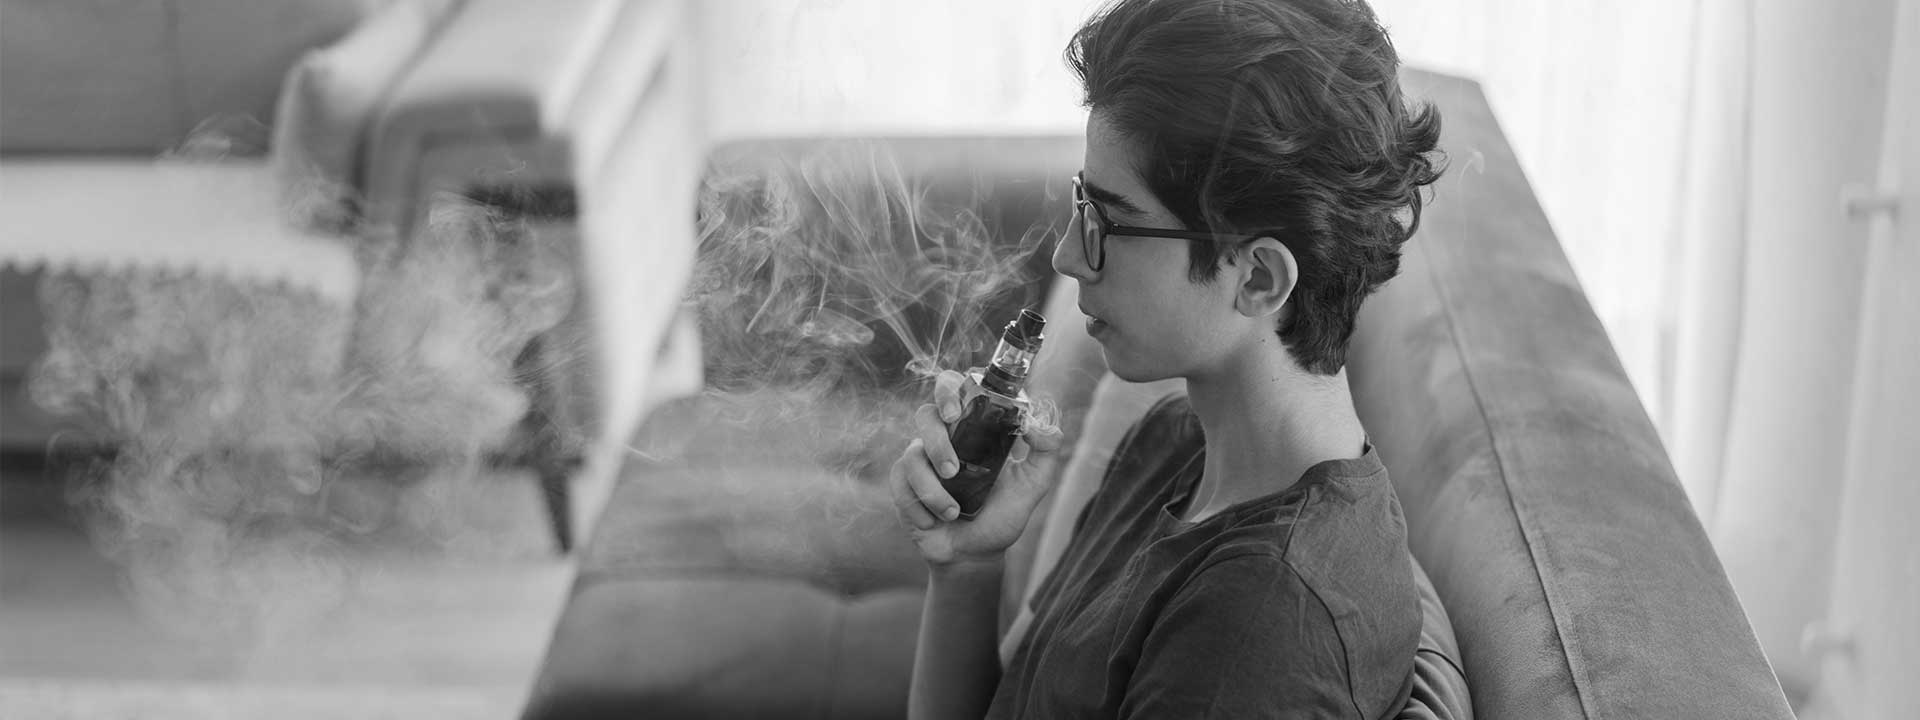 One young teenager vaping at home